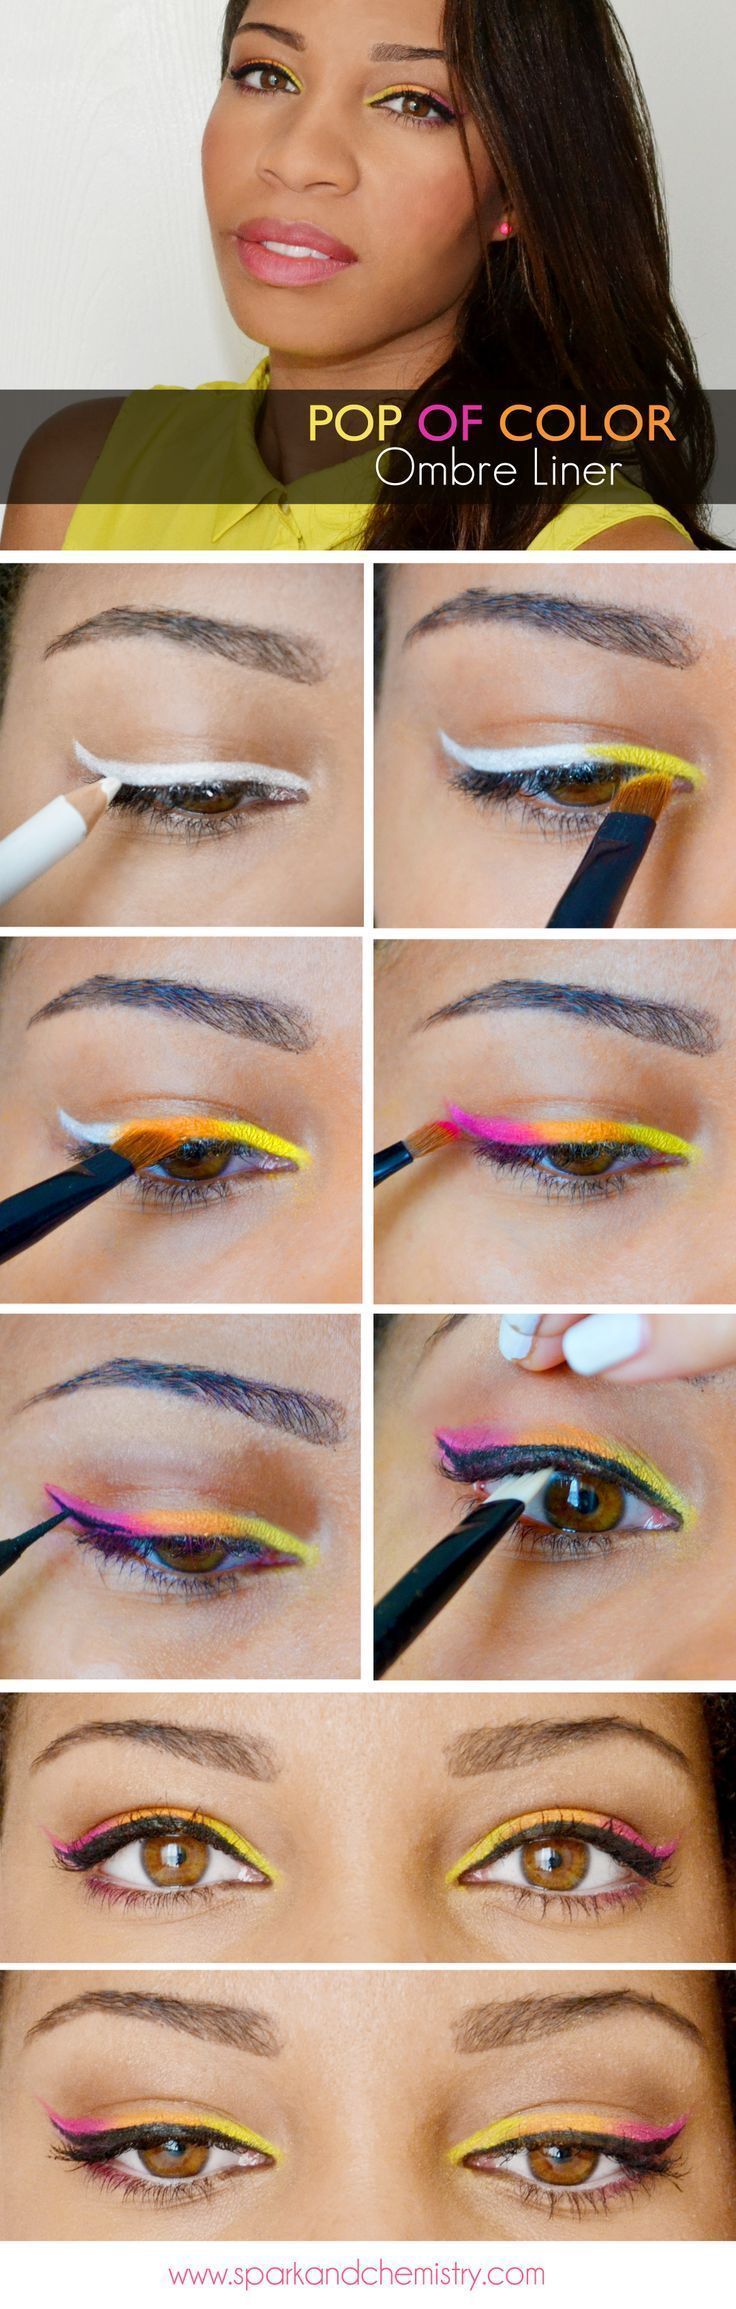 How To: Ombré Eyeliner | We Love this Trendy Eyeliner Style by Makeup Tutorials...